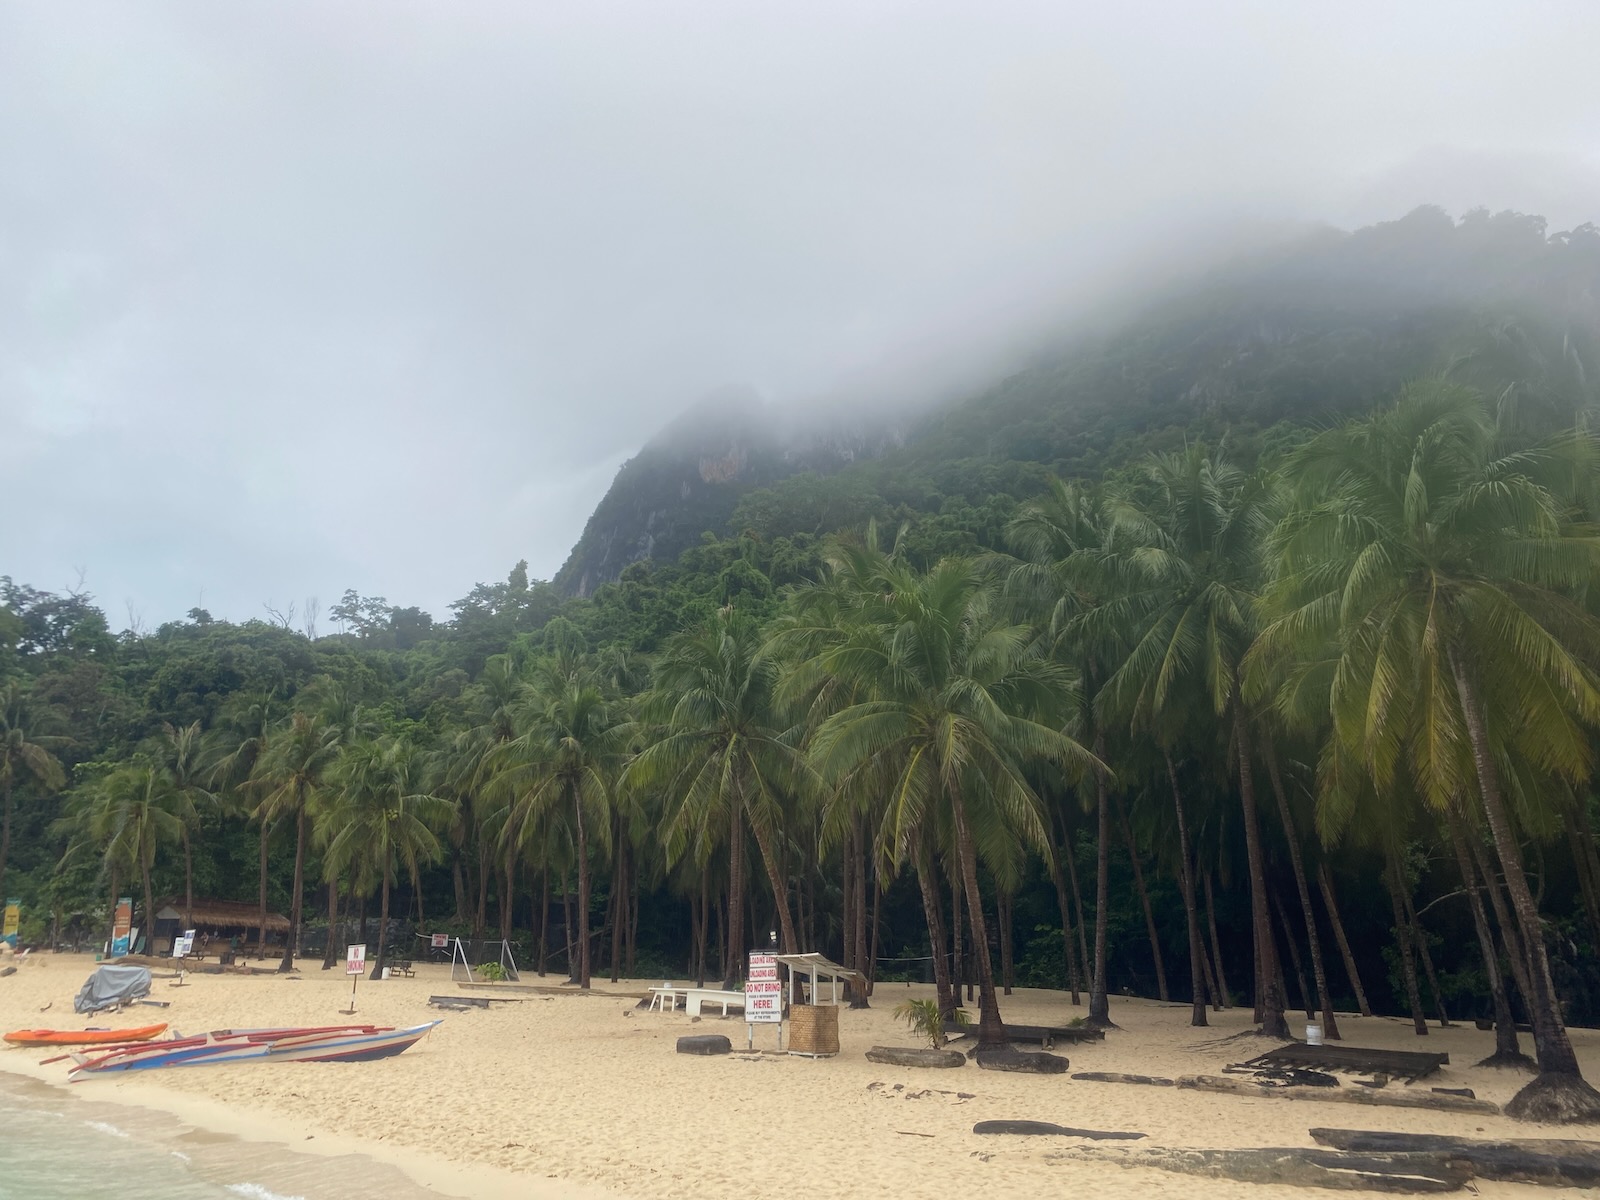 A beach with palm trees fading into a foggy hillside.